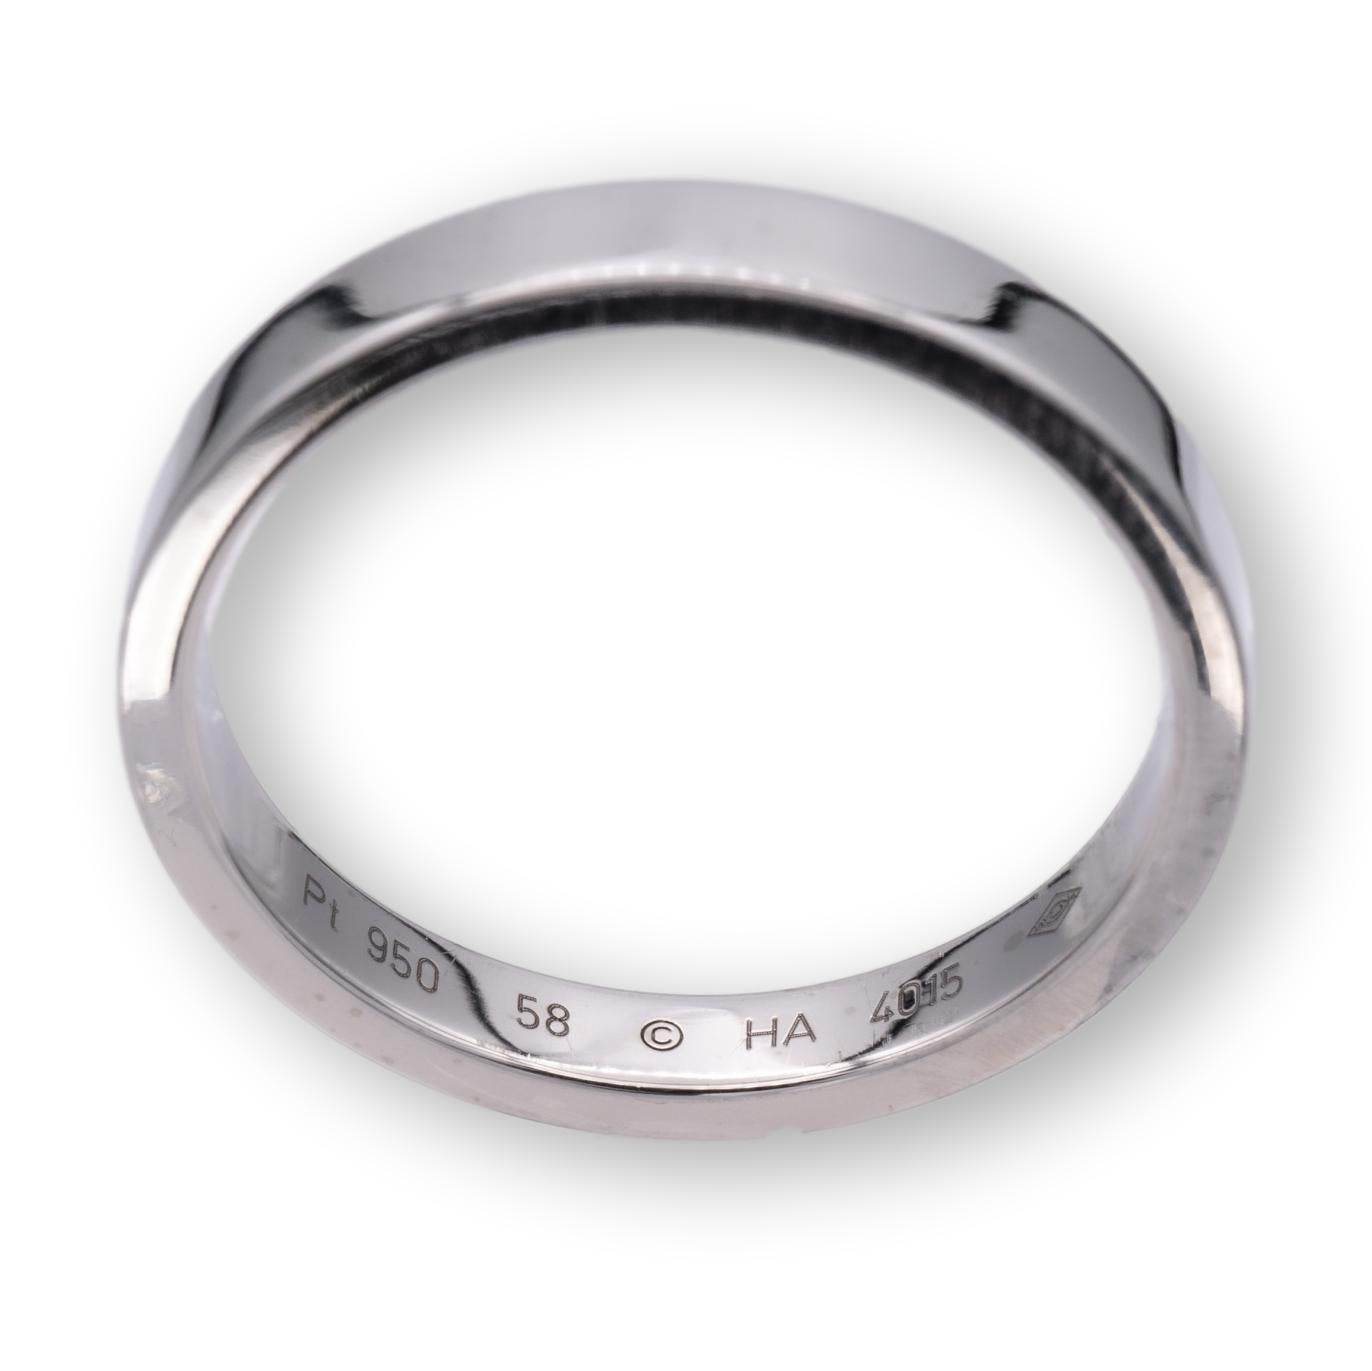 Cartier wedding band ring from the 